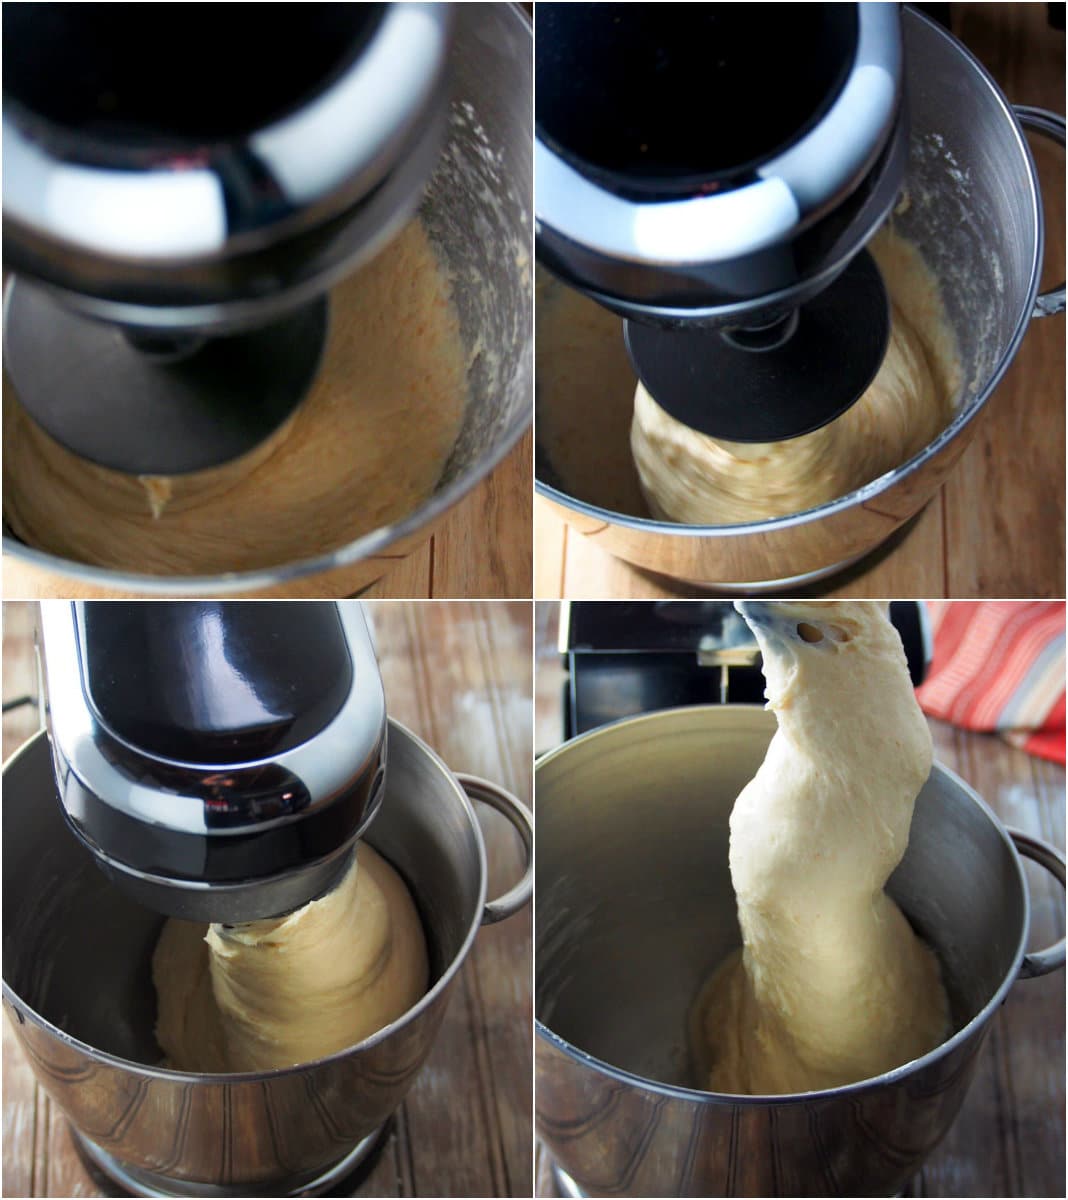 A collage showing the mixing stages of brad dough on a stand mixer.